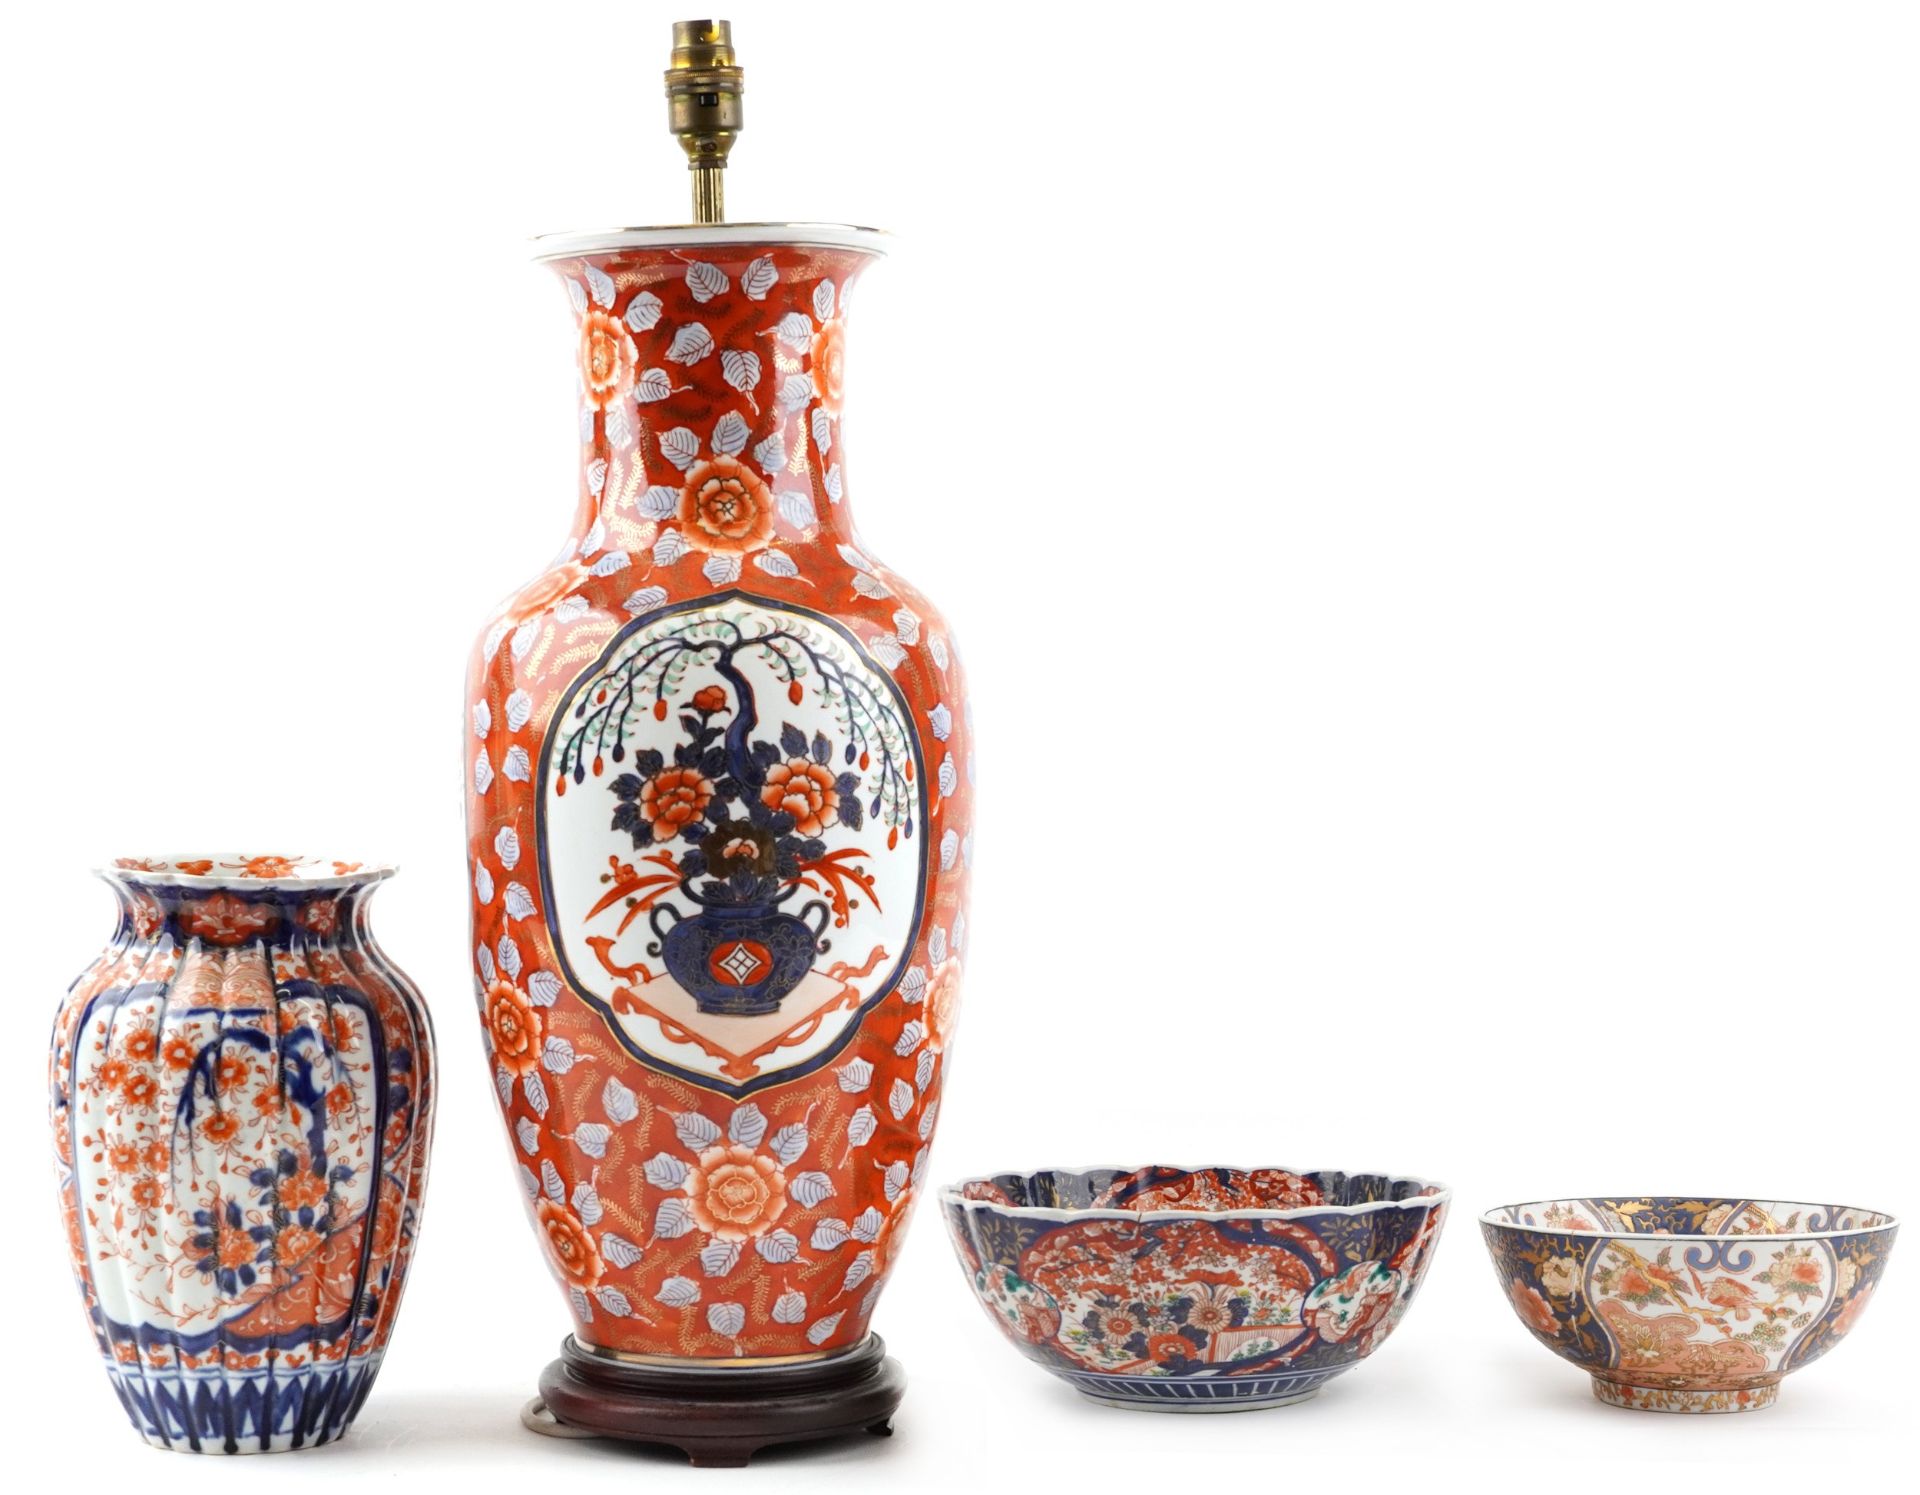 Japanese Imari porcelain including a large vase table lamp, fluted vase hand painted with flowers